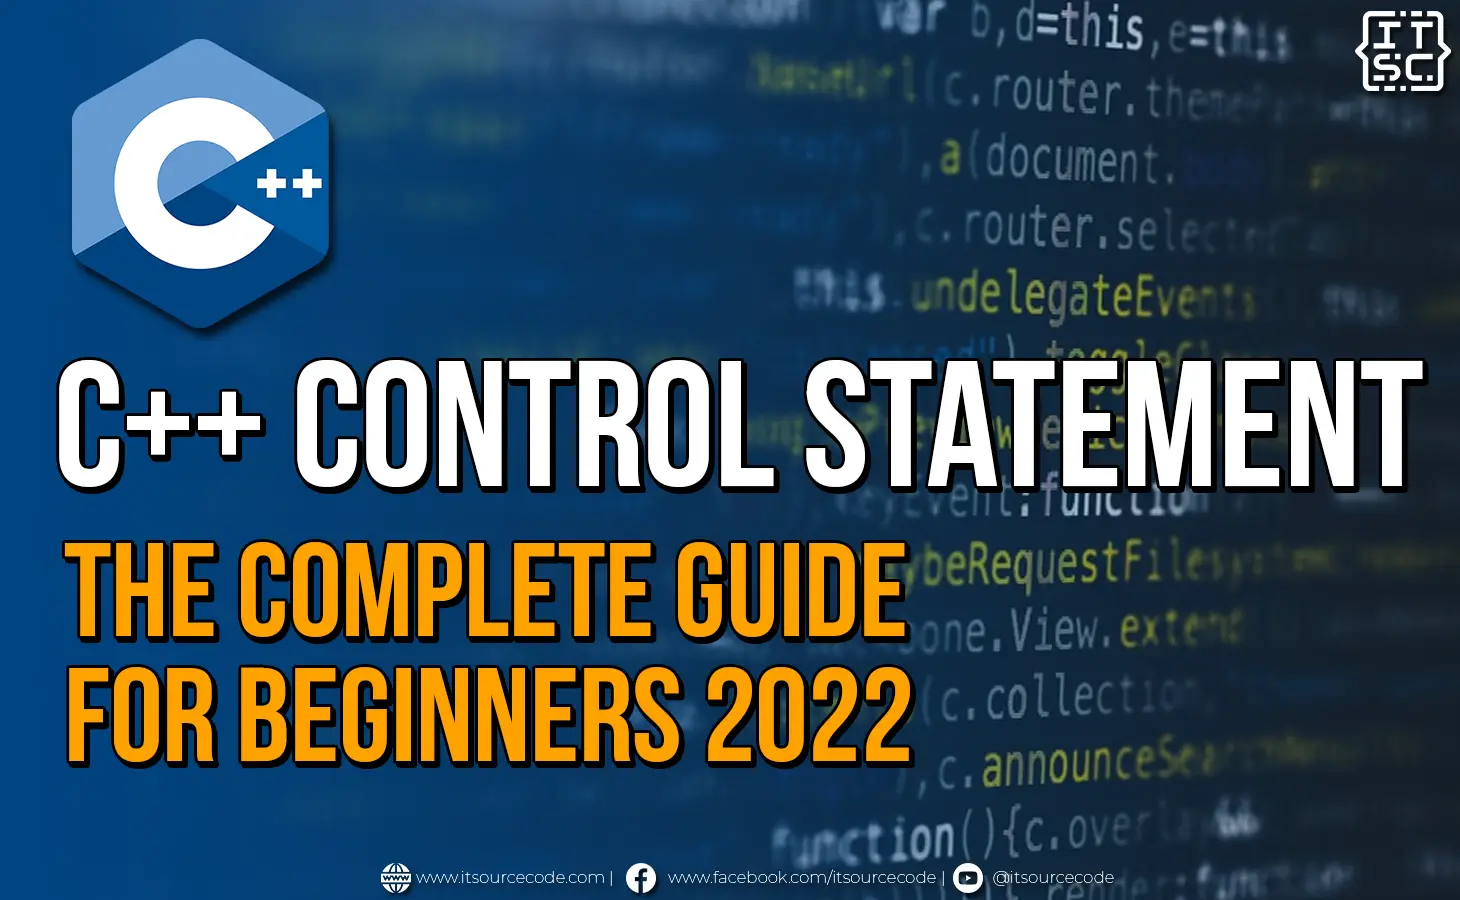 C++ CONTROL STATEMENT THE COMPLETE GUIDE FOR BEGINERS 2022